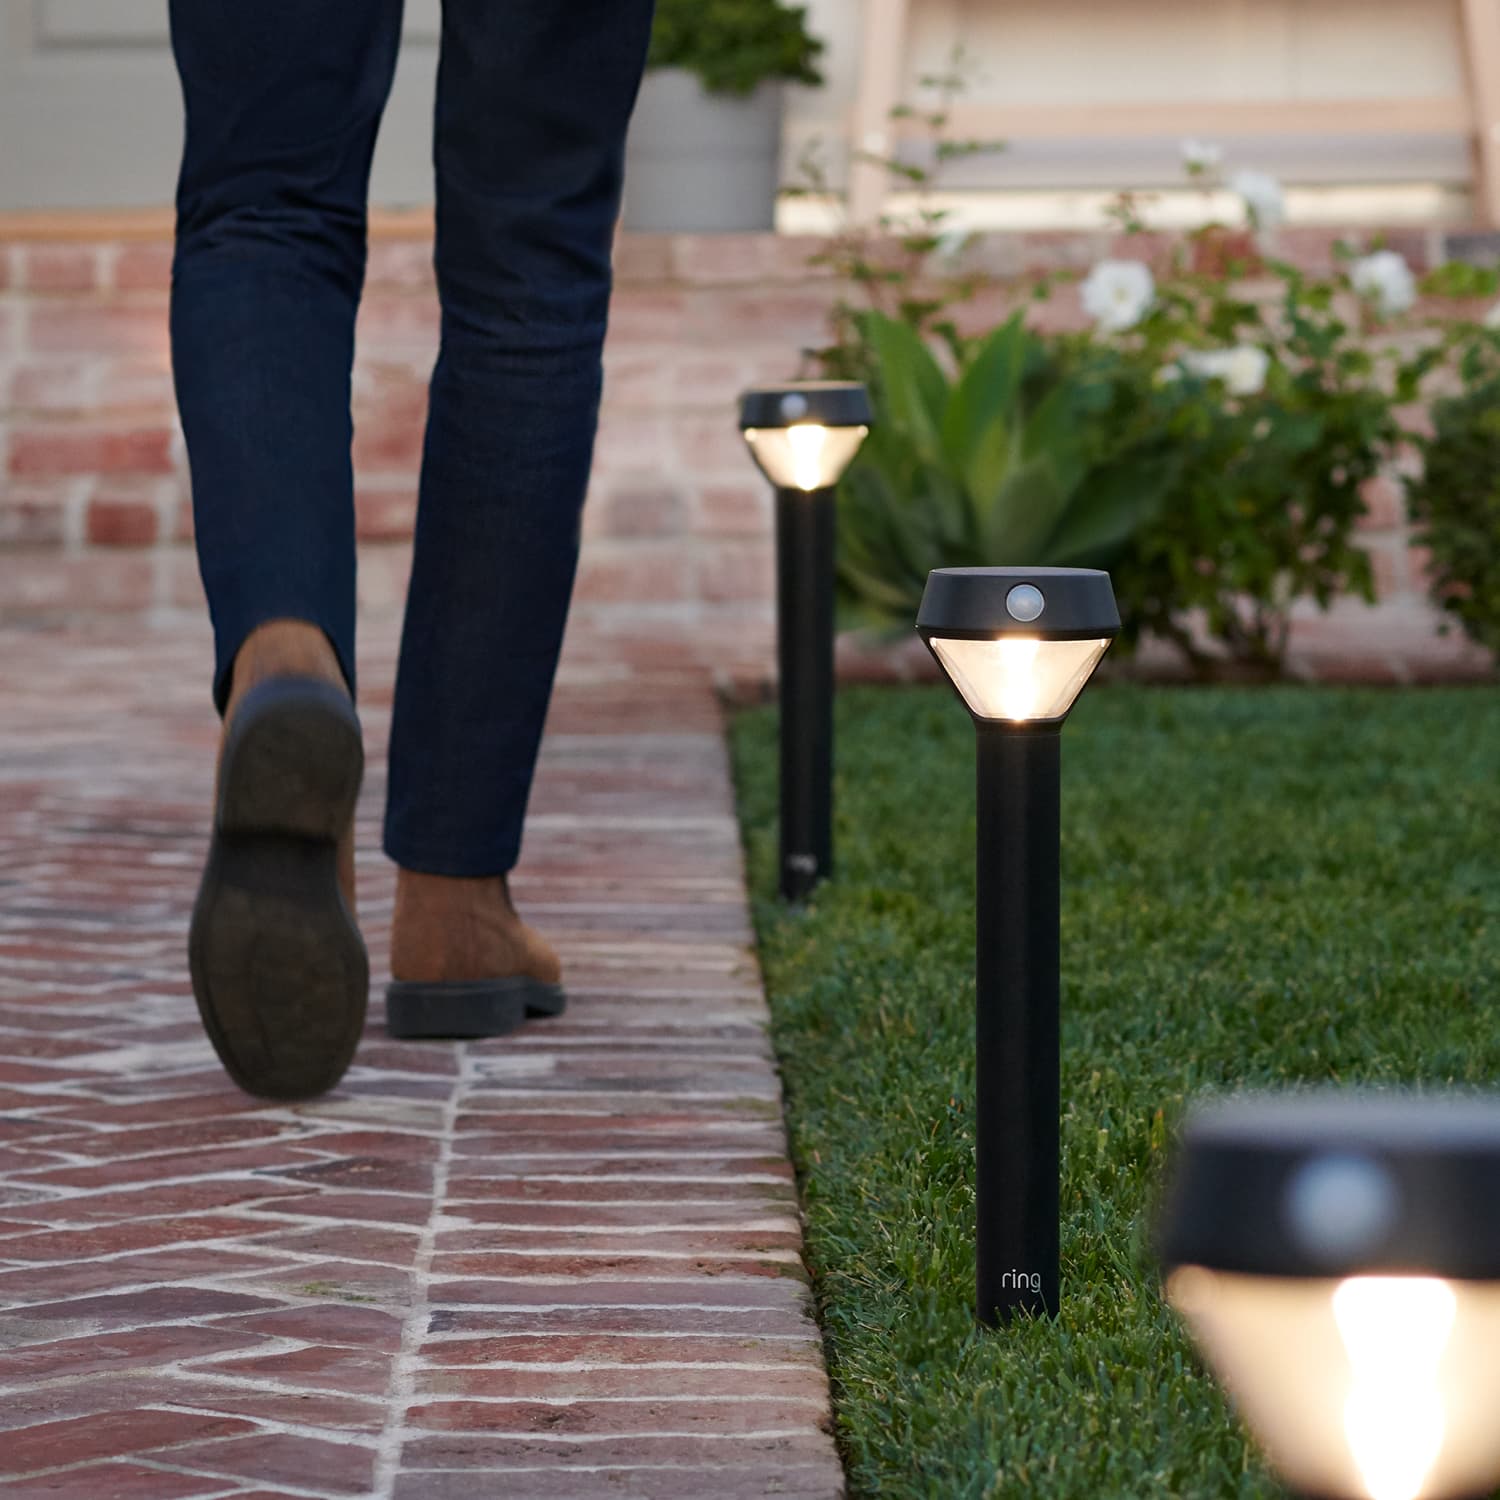 Smart Lighting Solar Pathlight - 3 Solar Pathlights are illuminated along a brick pathway while a person is walking towards the front door of a home.